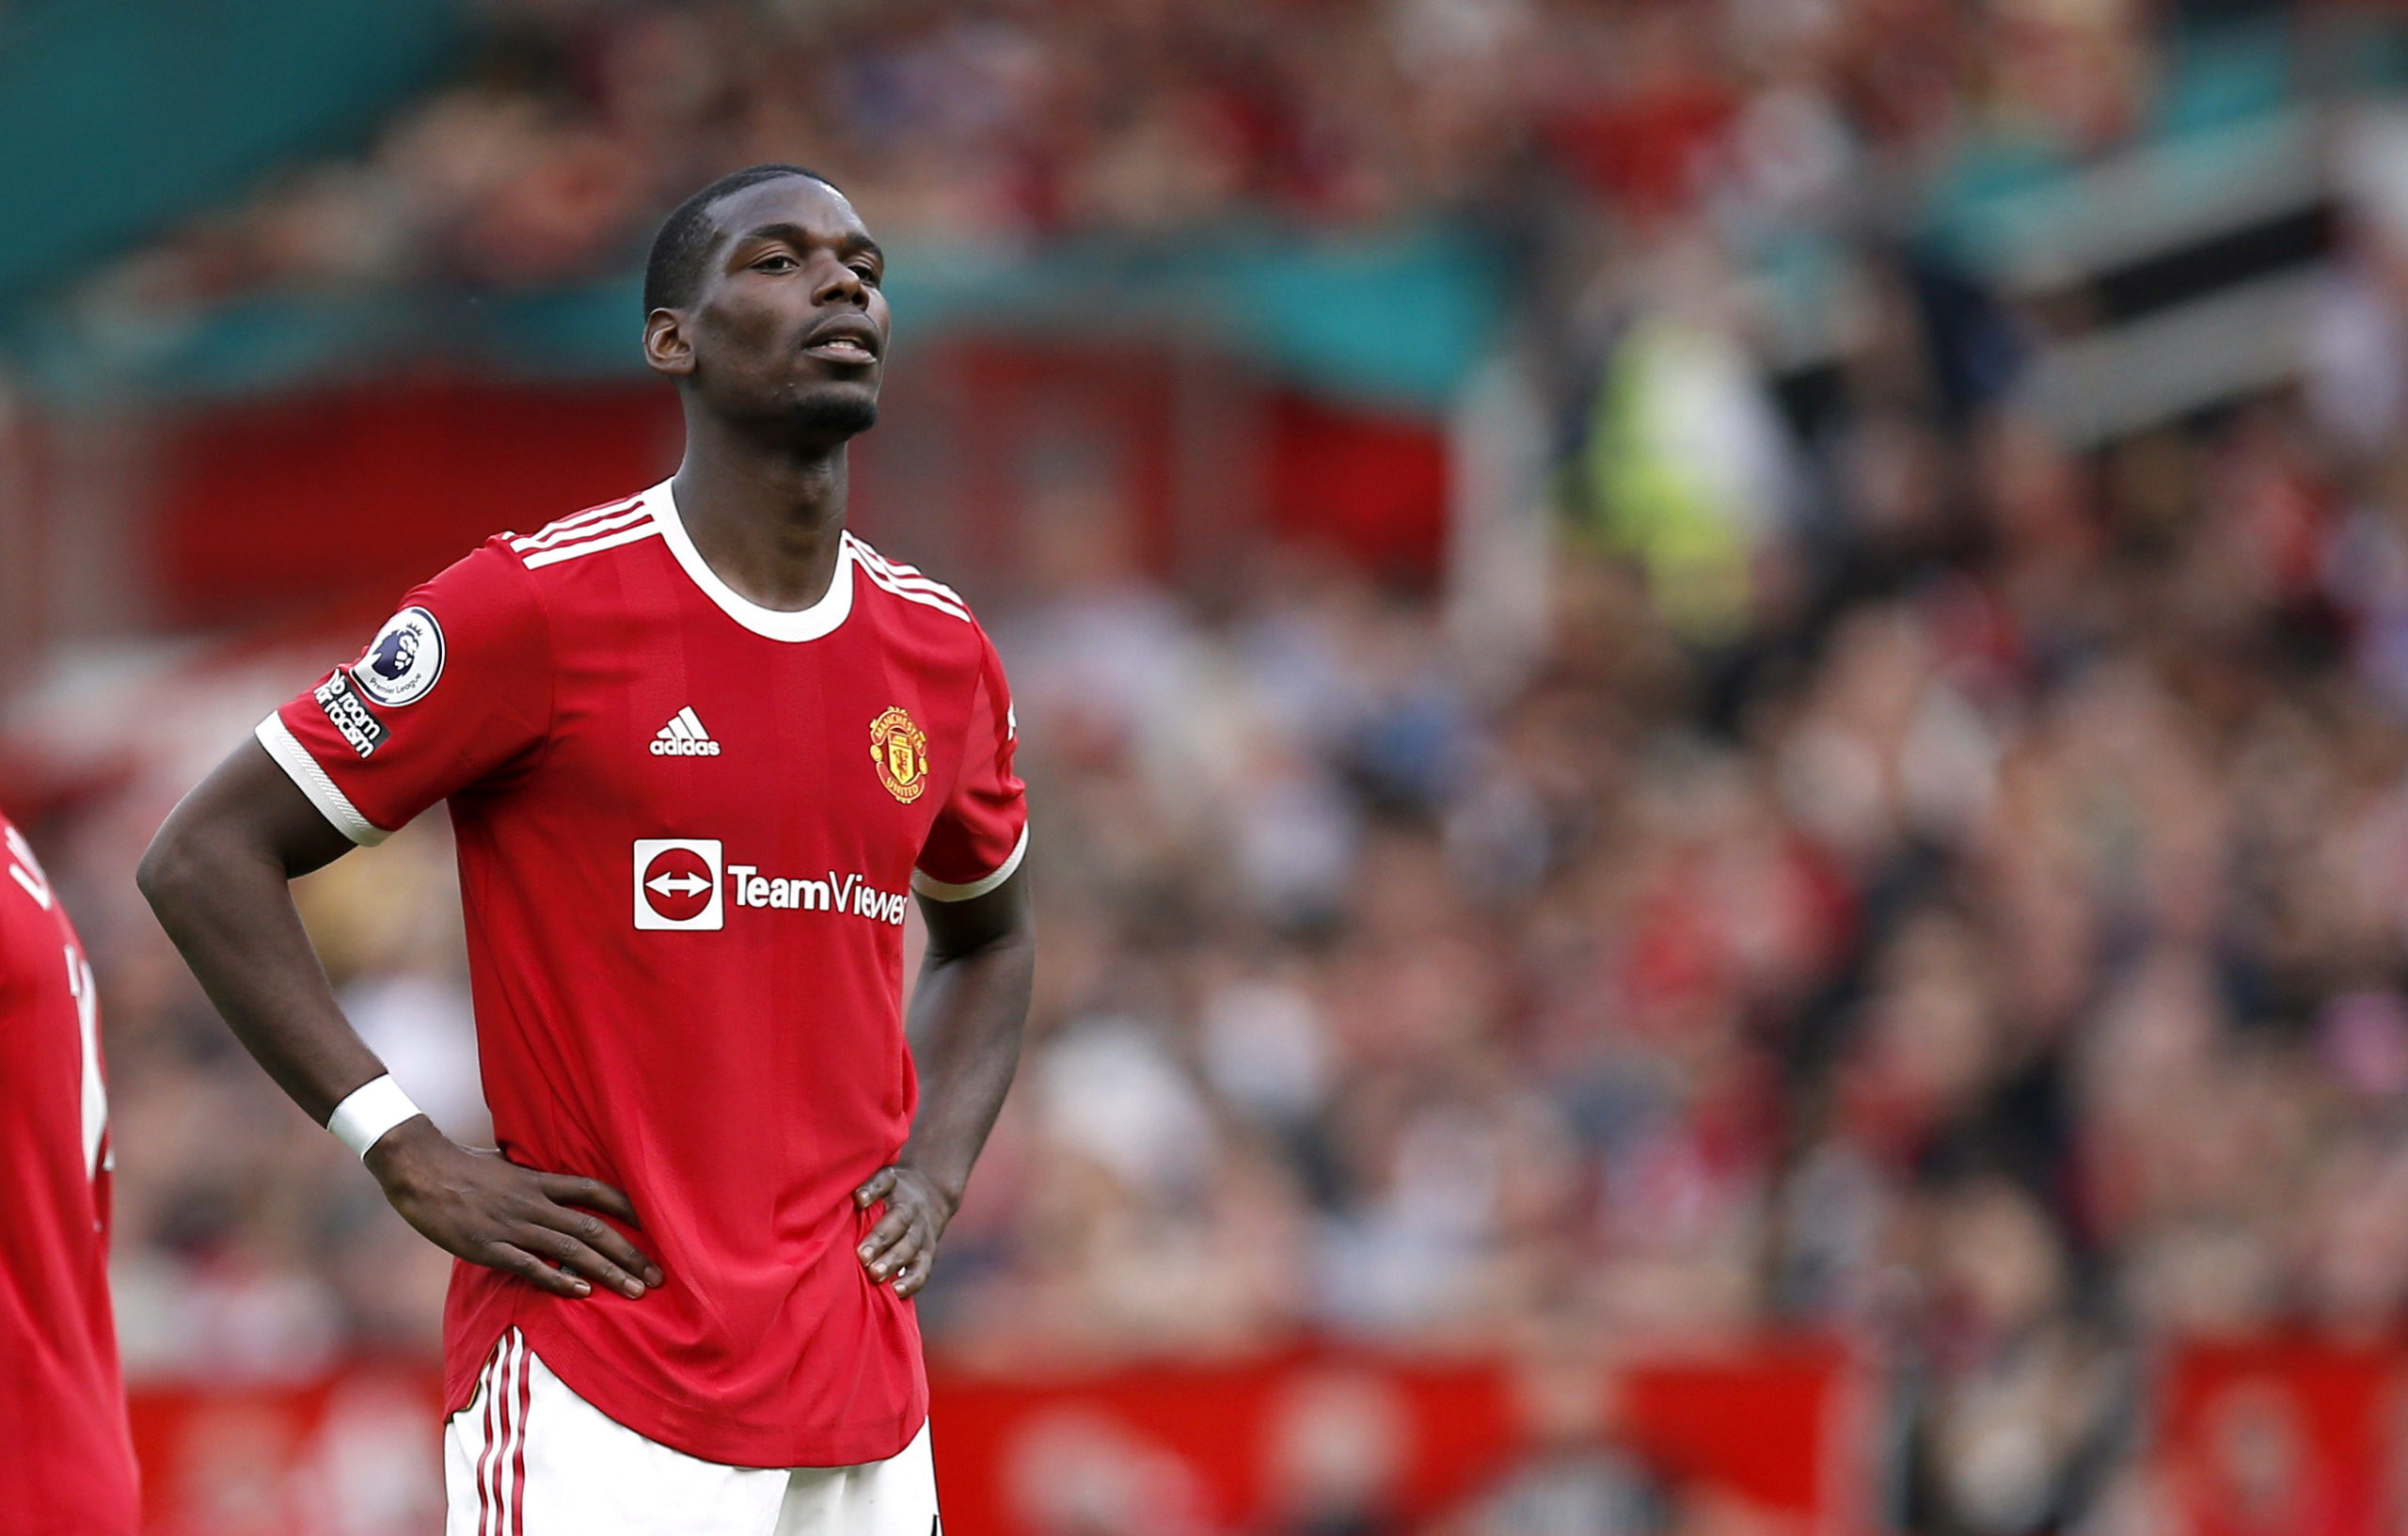 FILE PHOTO: Soccer Football - Premier League - Manchester United v Norwich City - Old Trafford, Manchester, Britain - April 16, 2022 Manchester United's Paul Pogba reacts REUTERS/Craig Brough